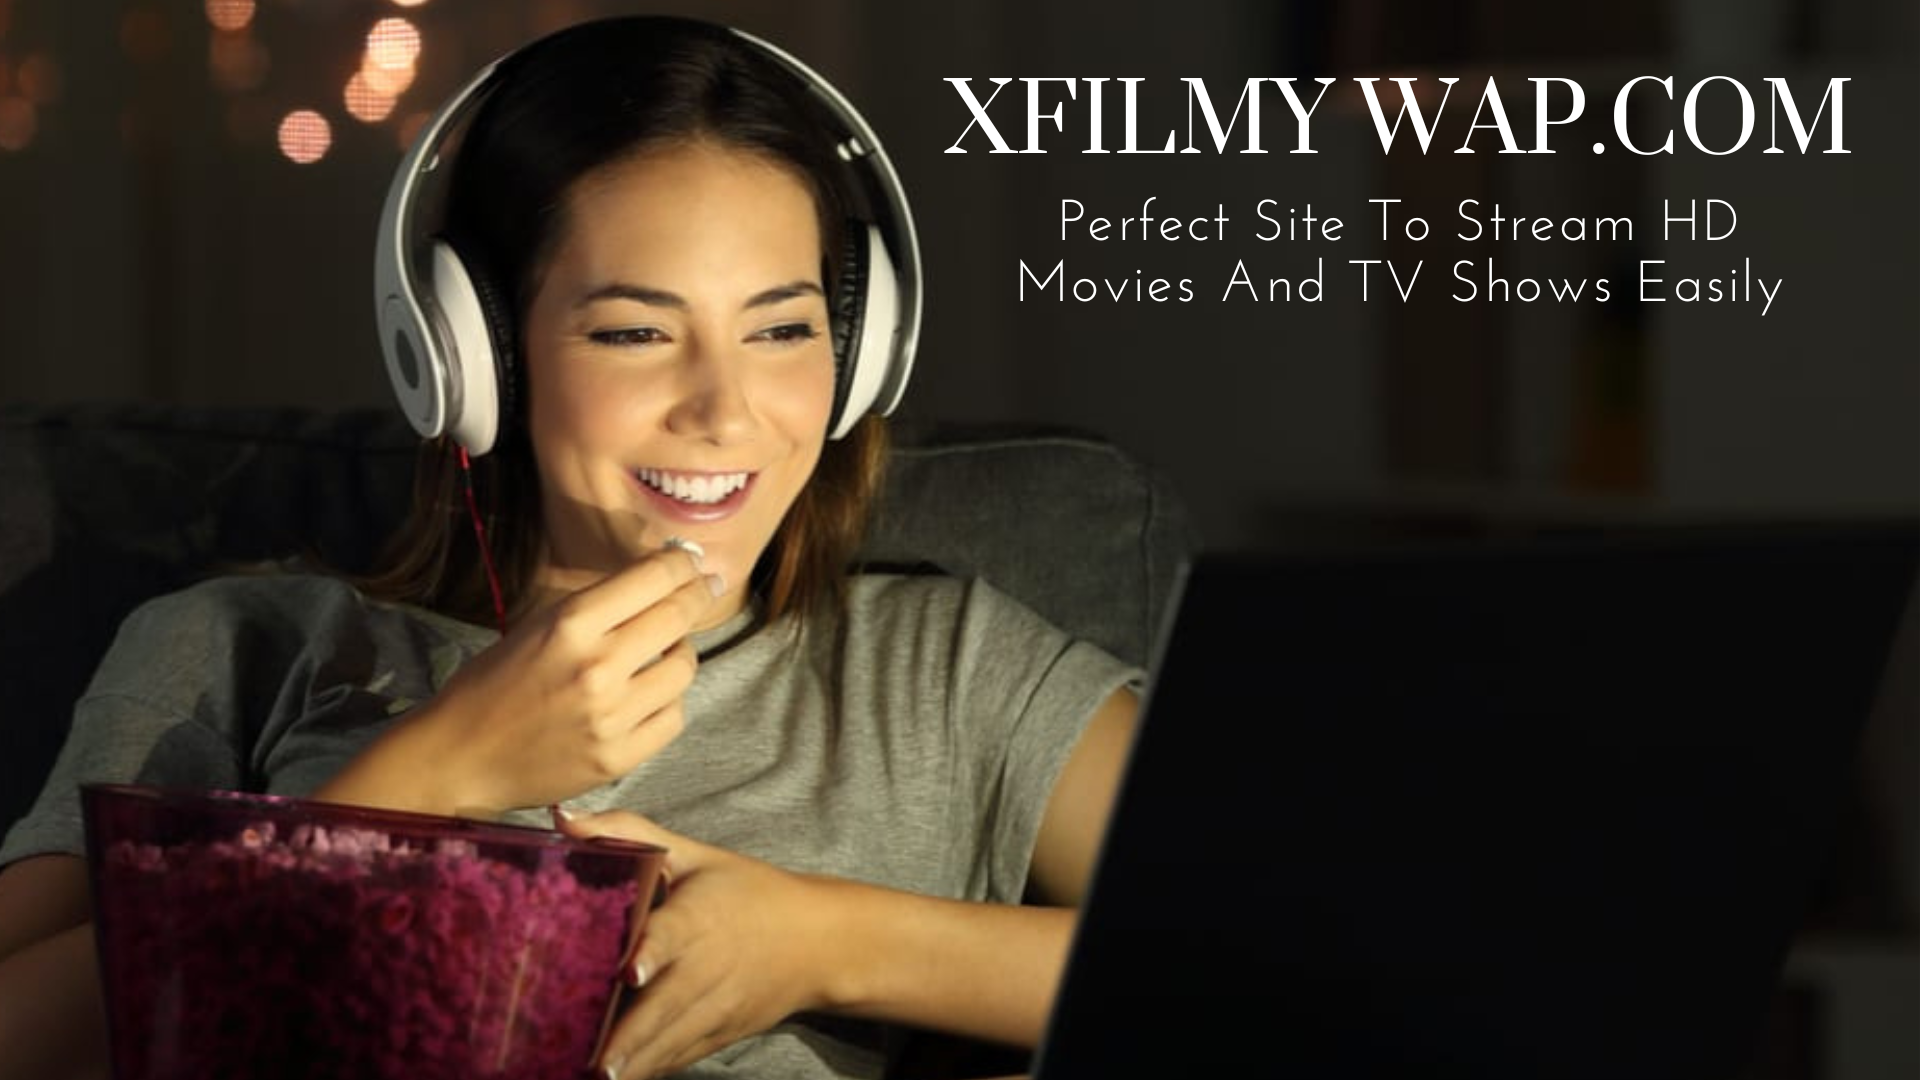 Xfilmy Wap.Com - Perfect Site To Stream HD Movies And TV Shows Easily